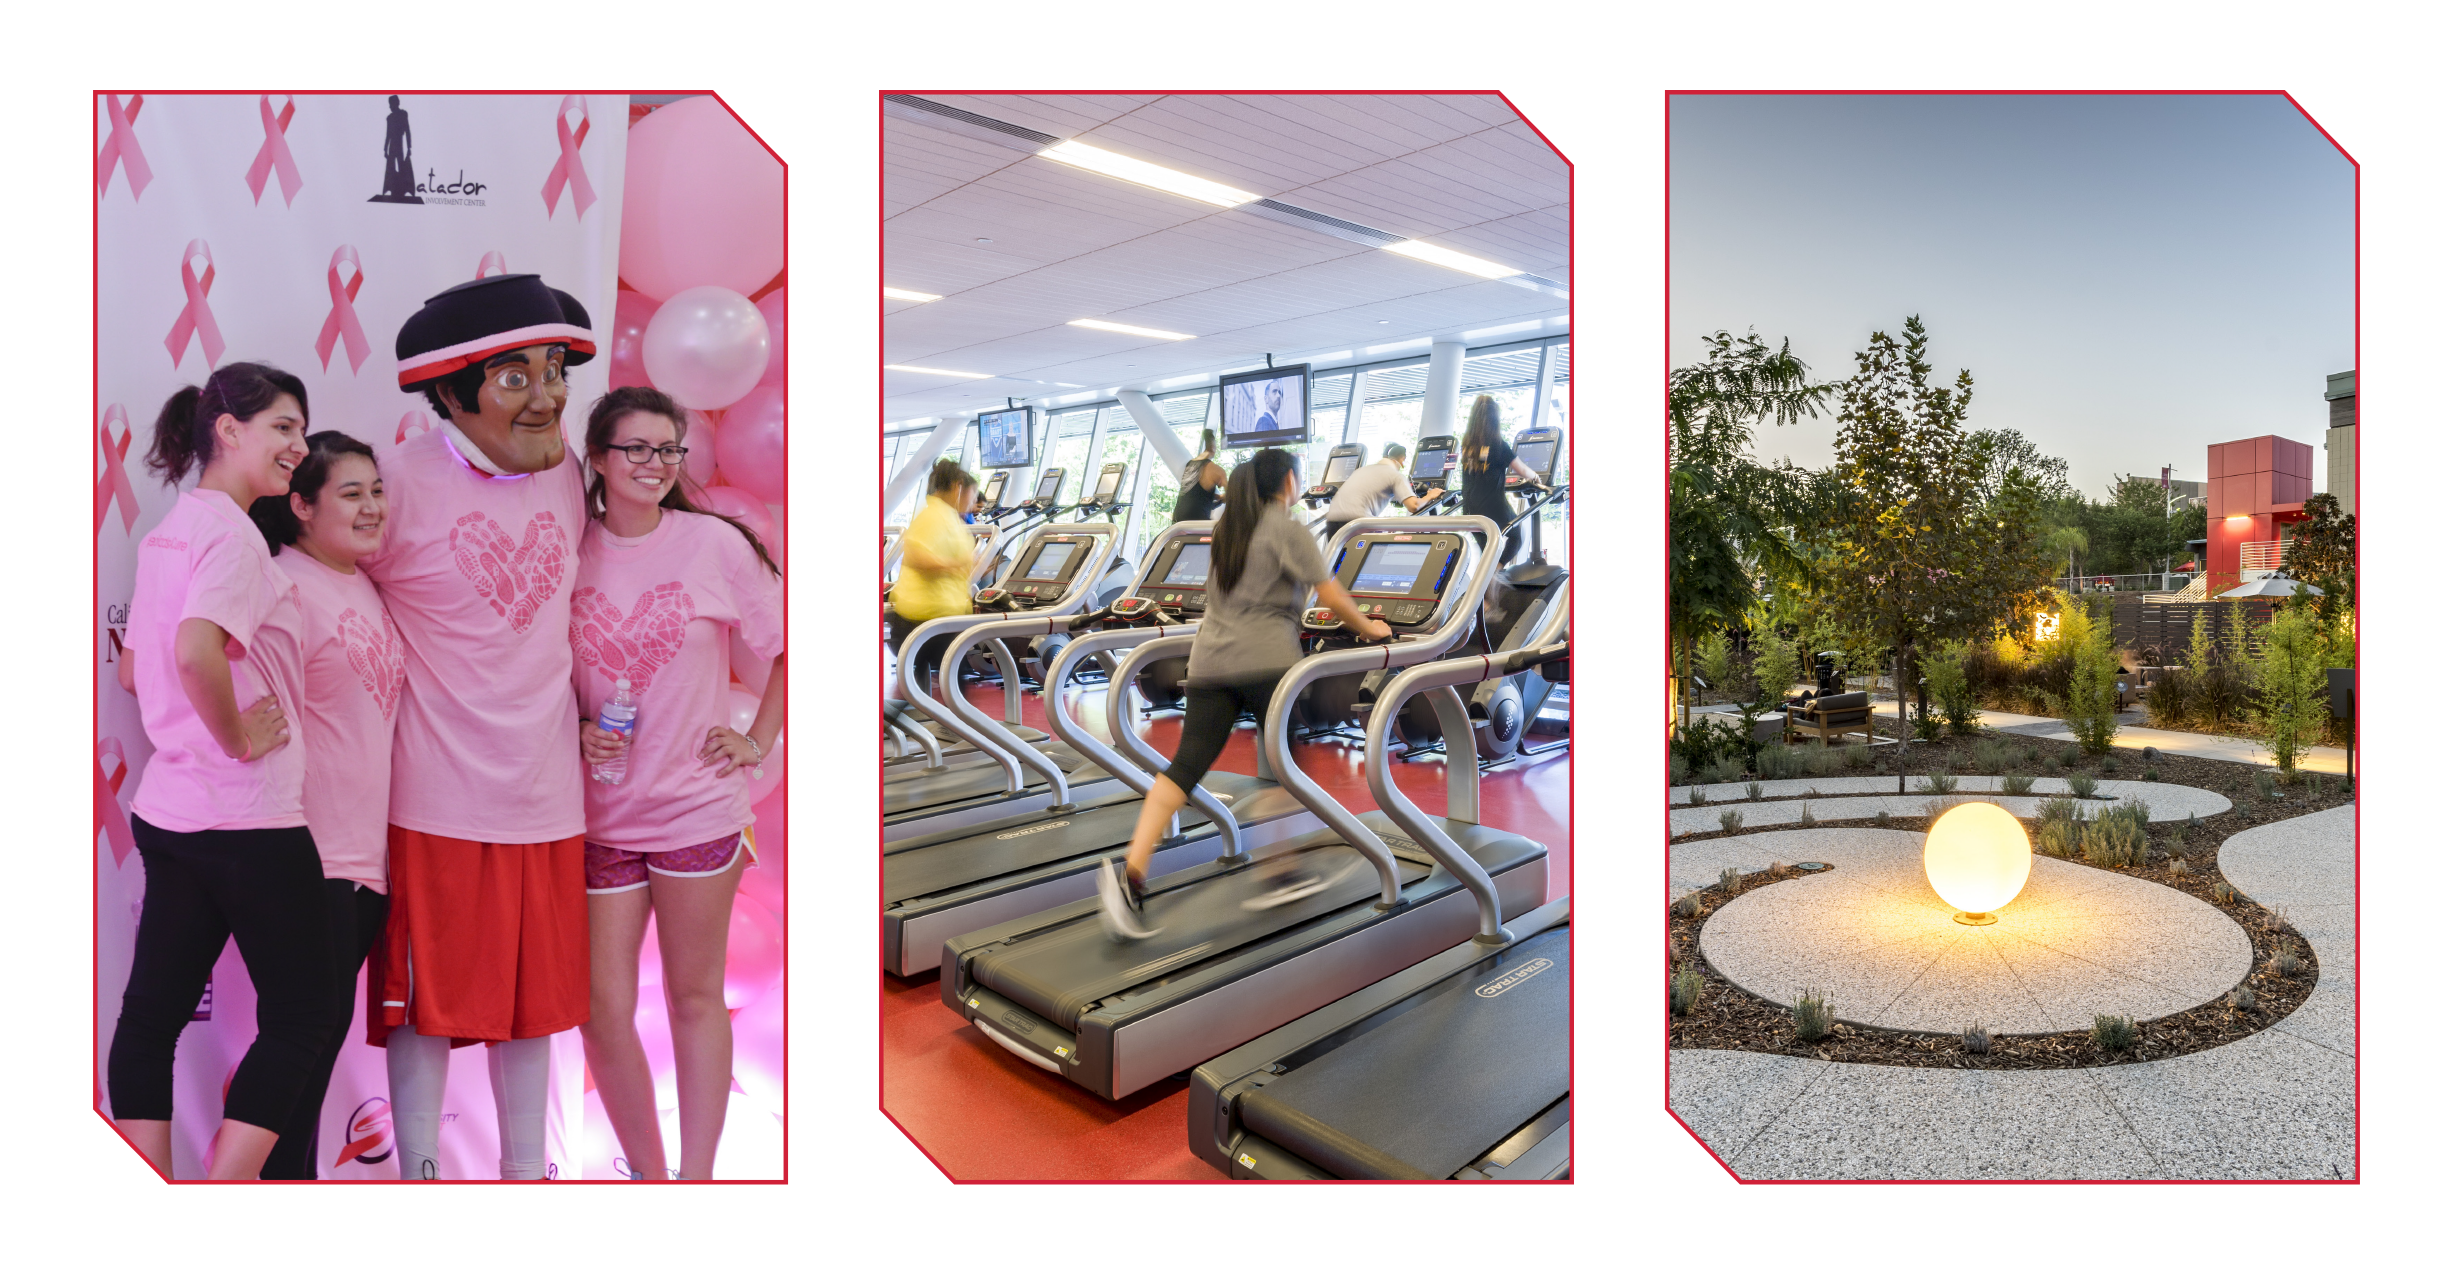 Images of Zumbathon, fitness equipment and Oasis Wellness Center